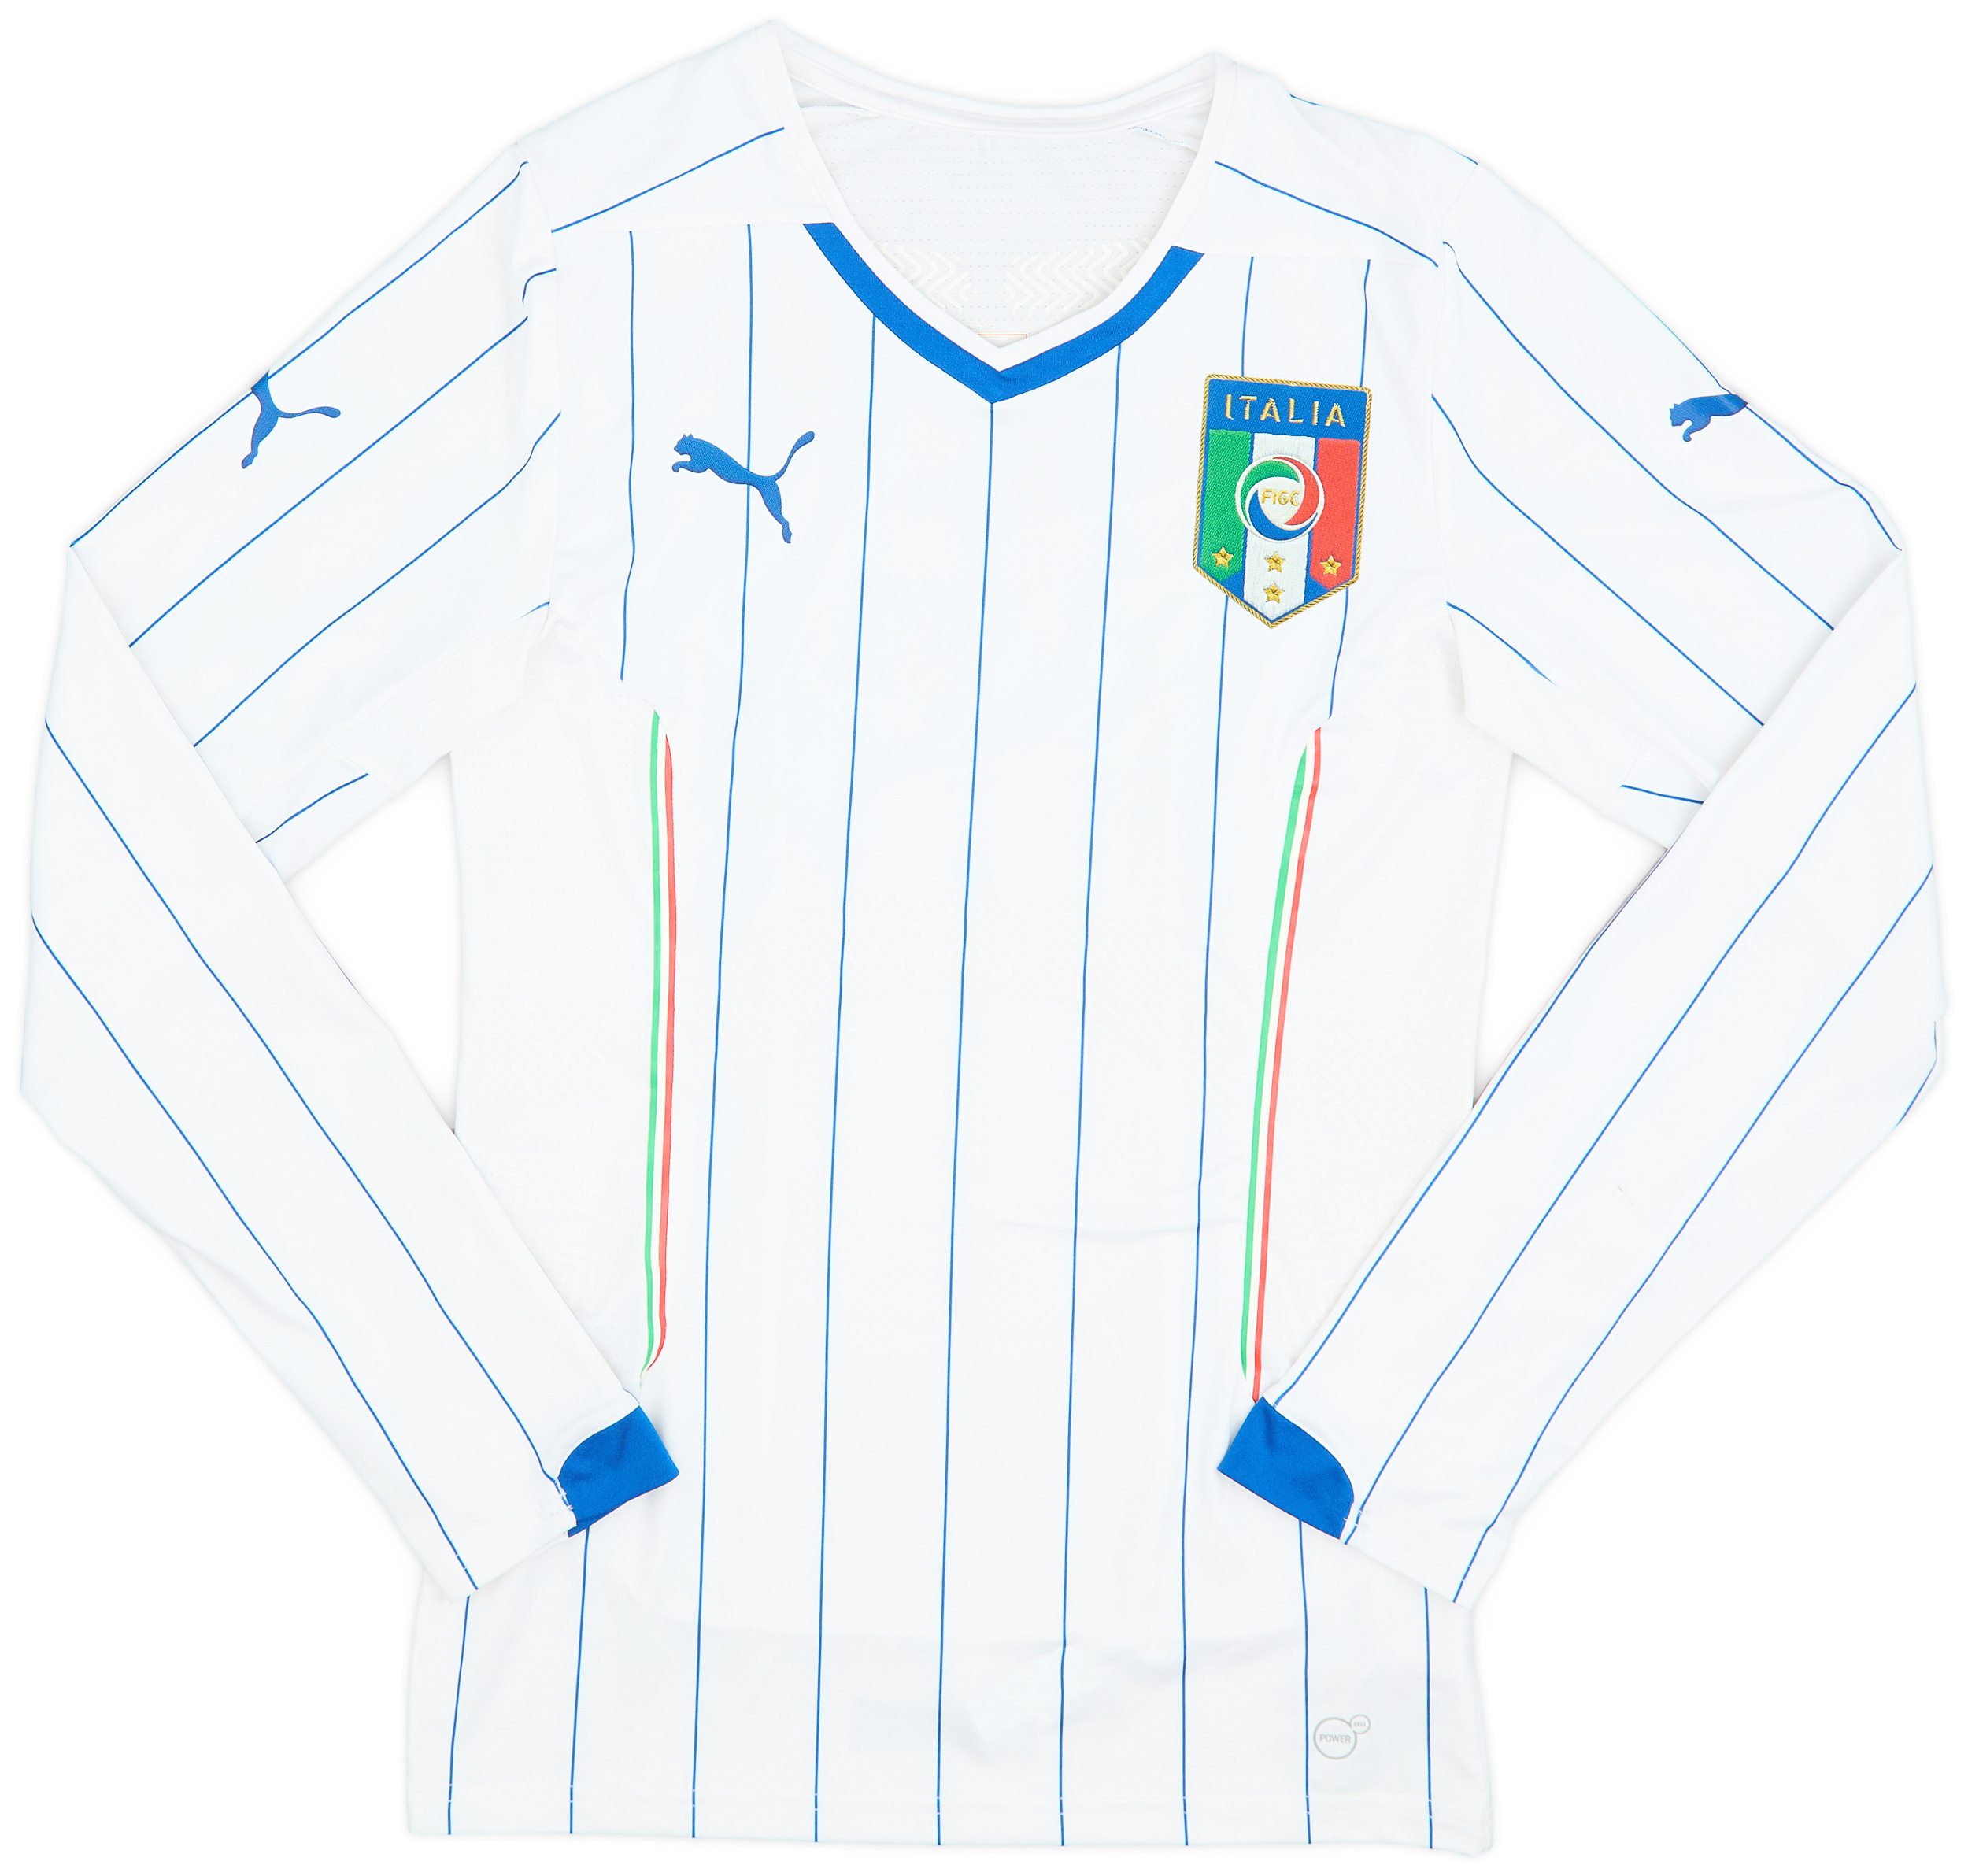 2014-15 Italy Player Issue Away Shirt - 8/10 - ()